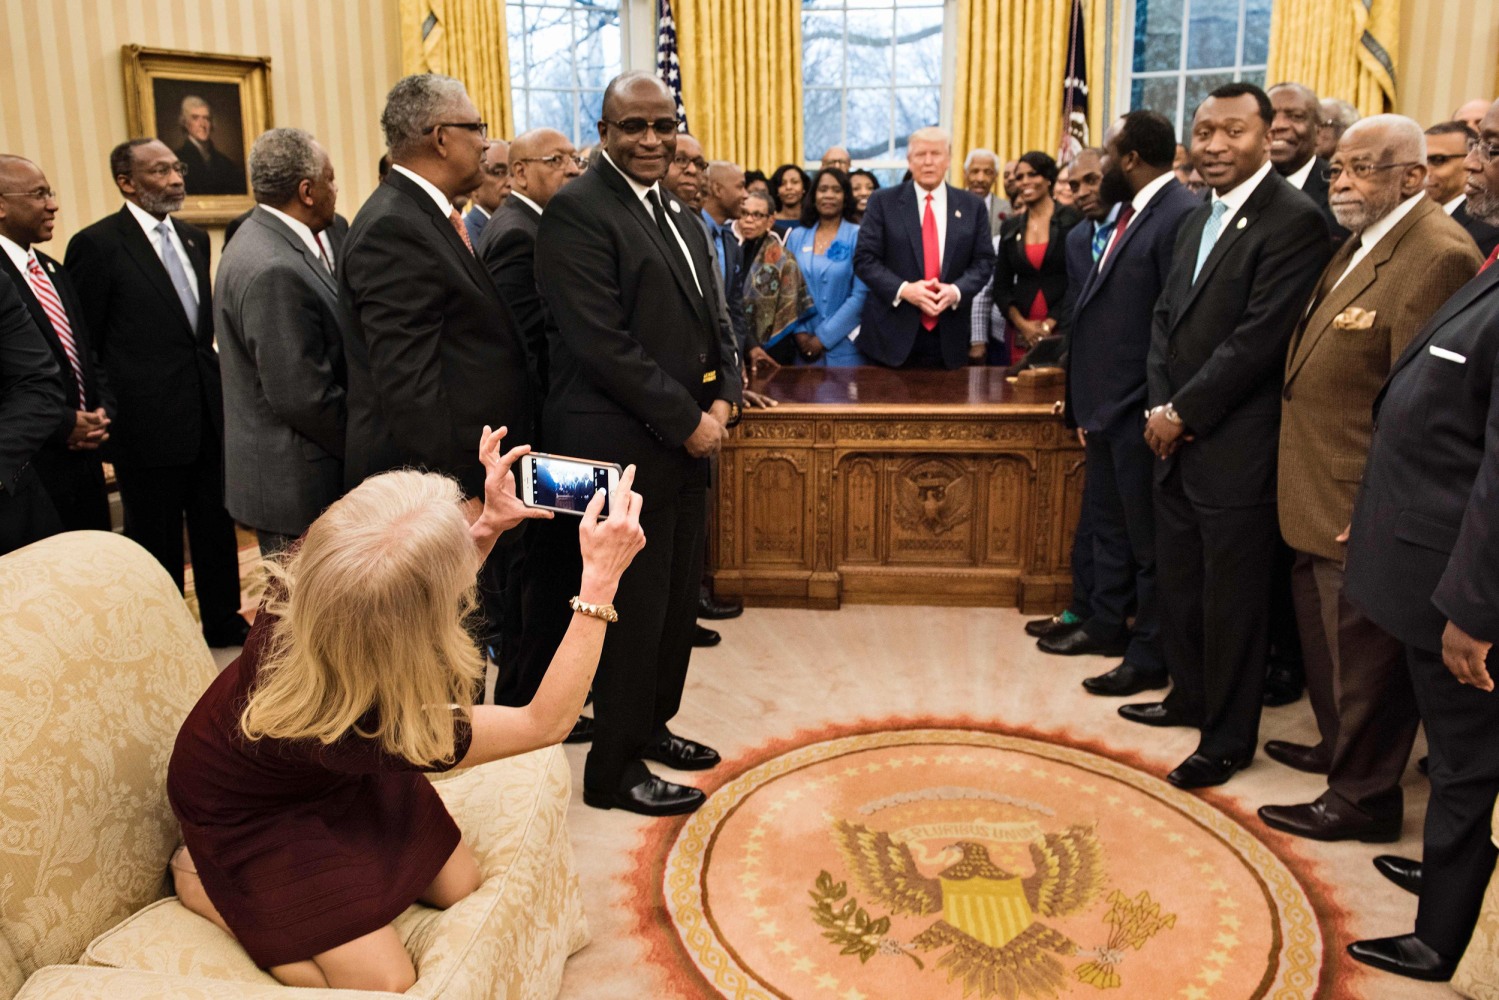 170228-kellyanne-couch-oval-office-8a_bf